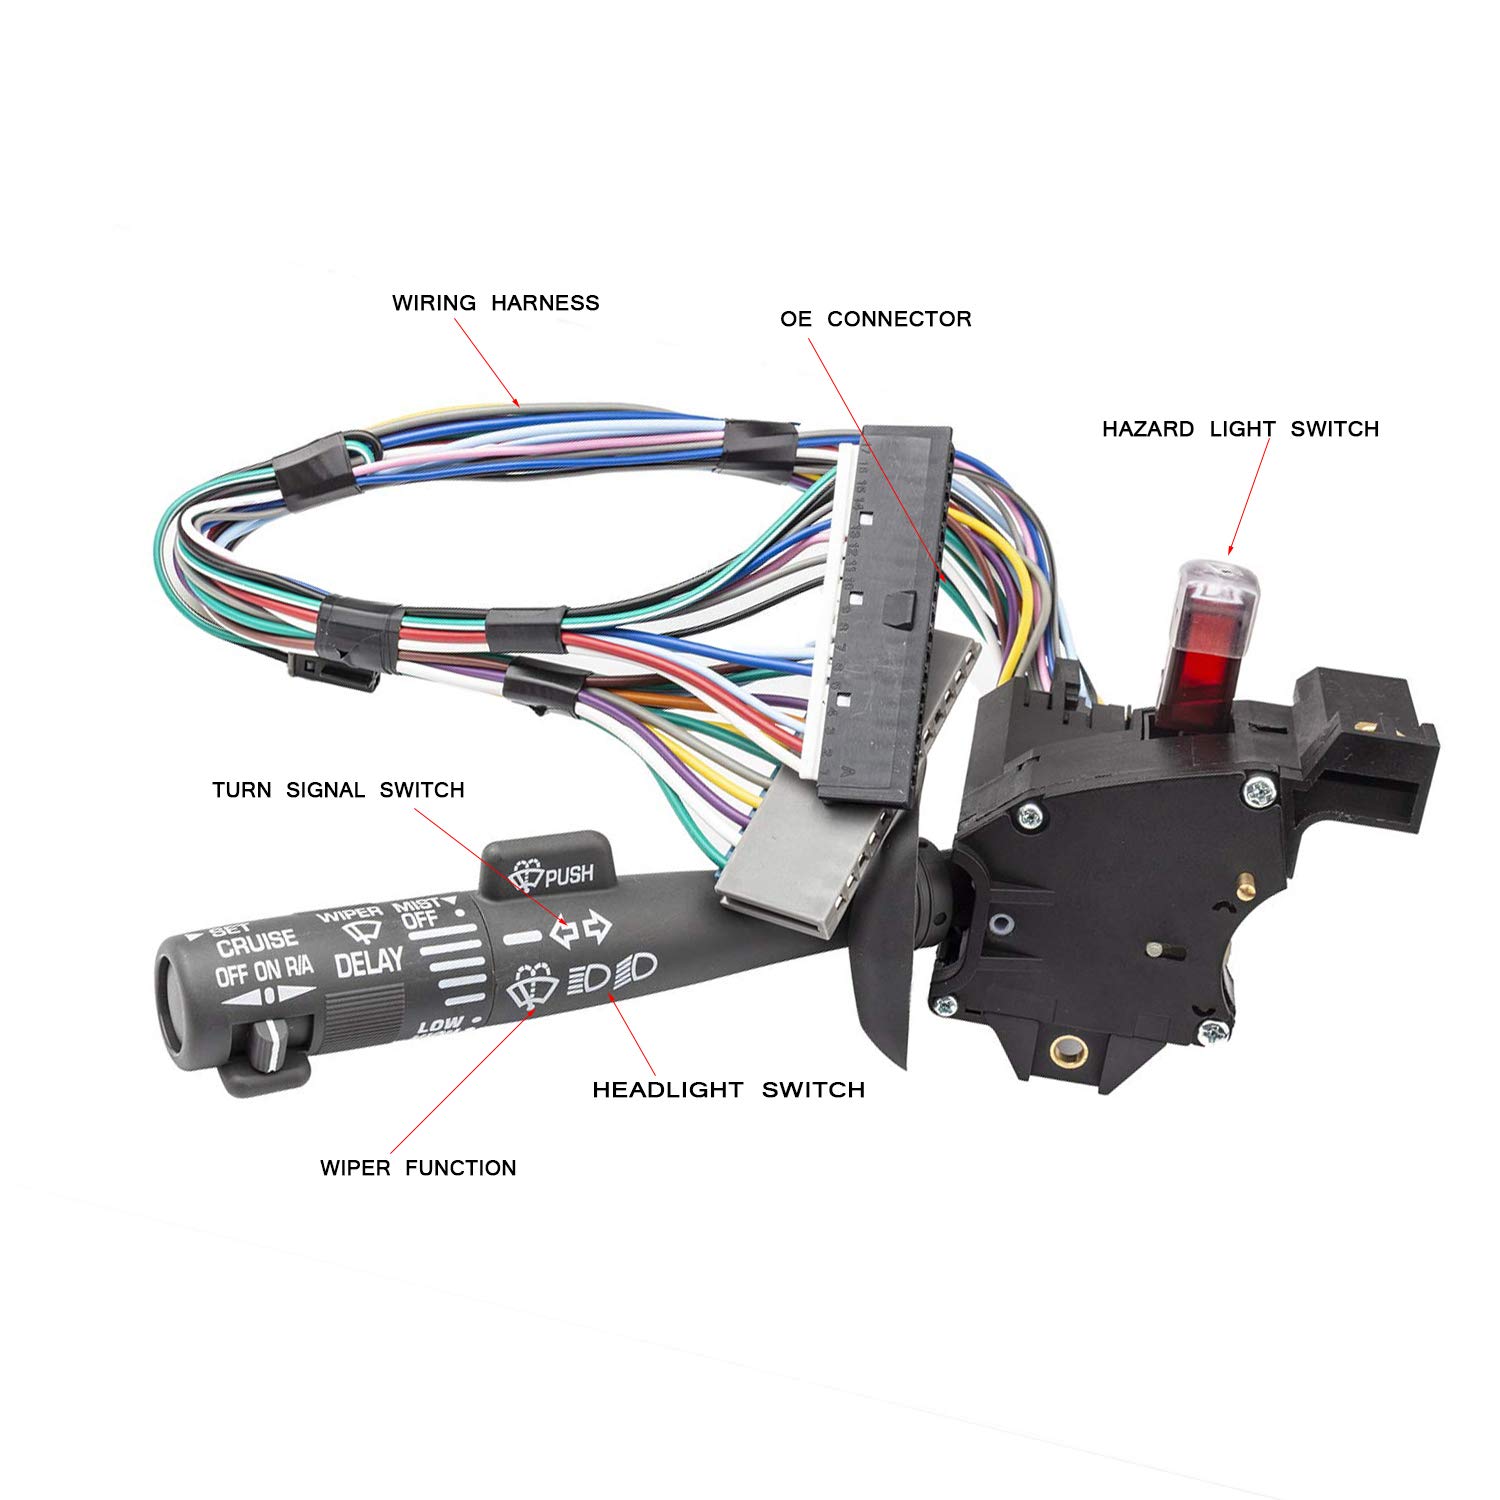 Multi-Function Combination Switch Replacement for 1995-2002 Chevy Tahoe S10 GMC C1500 K1500 Suburban Yukon, Replace 2330814 26100985 26036312, Turn Signal, Wiper, Washers, Cruise Control